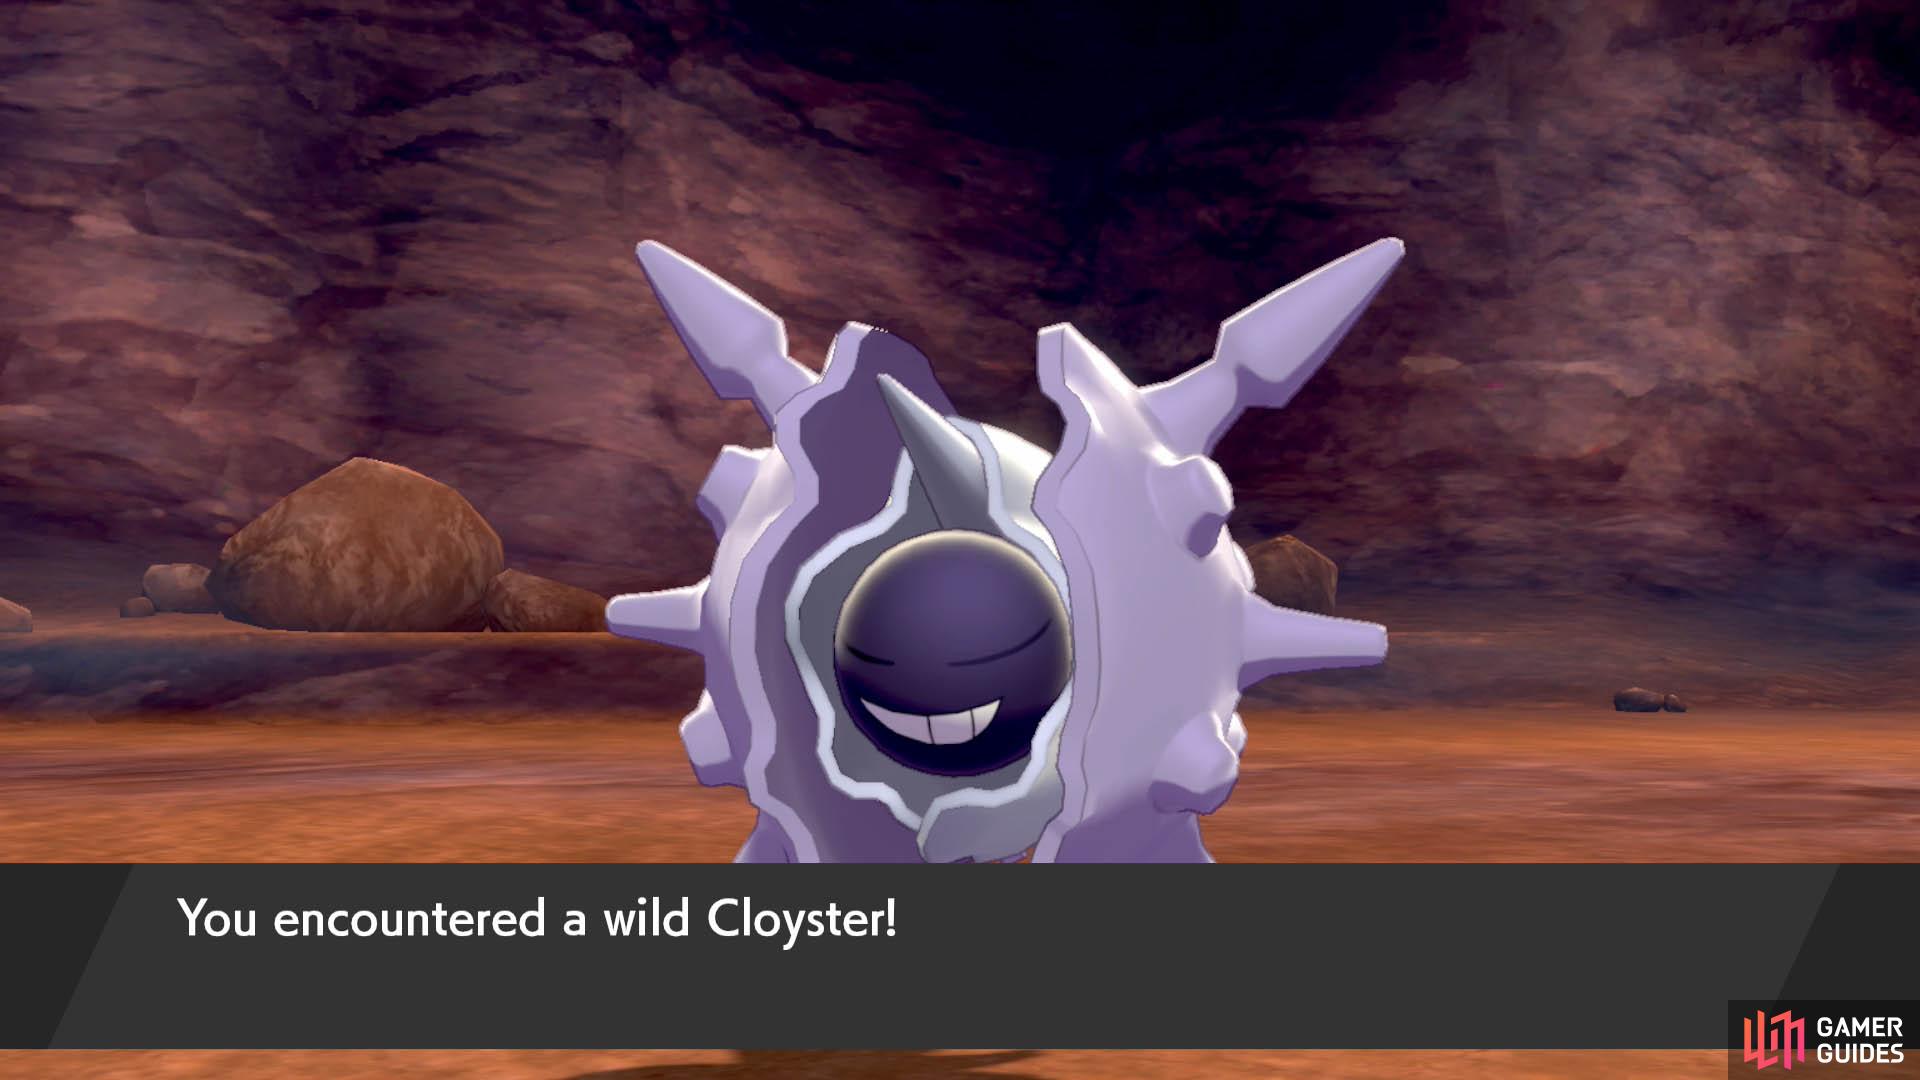 No, Cloyster, don’t close your eyes when we’re taking a photo!